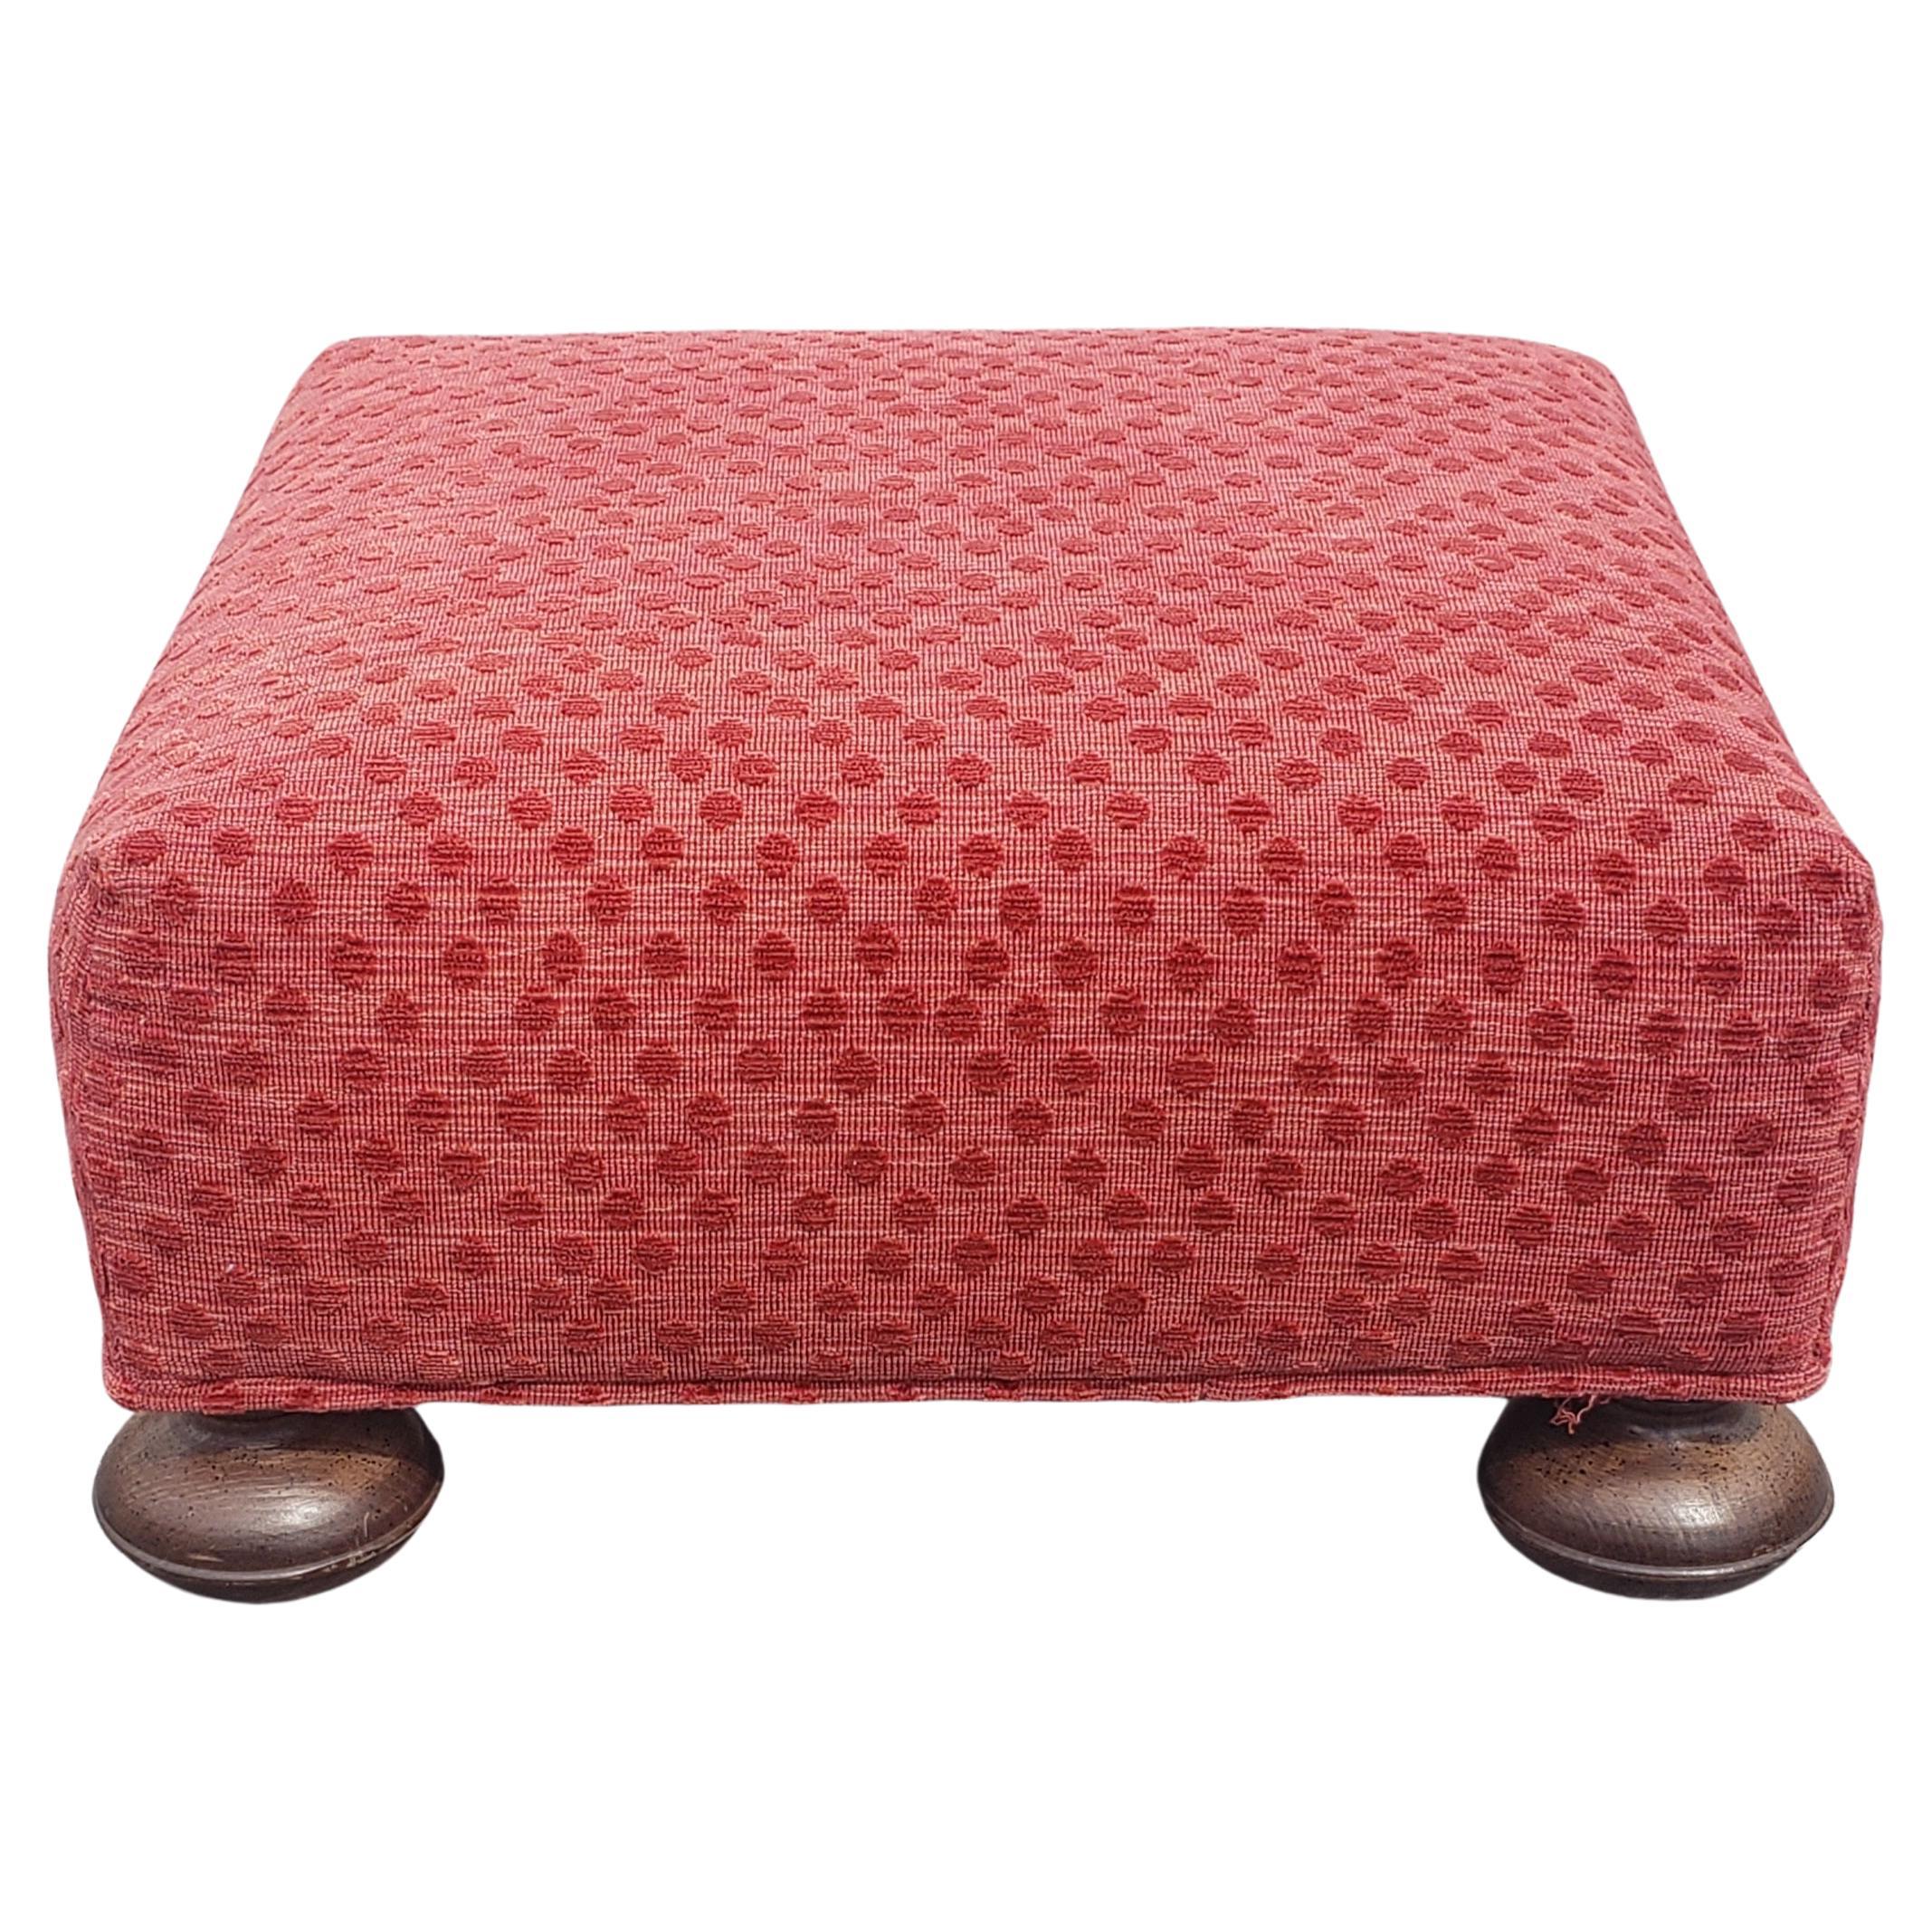 A beautiful late 20th century walnut and Upholstered William and Mary style footstool or ottoman in very good vintage condition. Measures 19